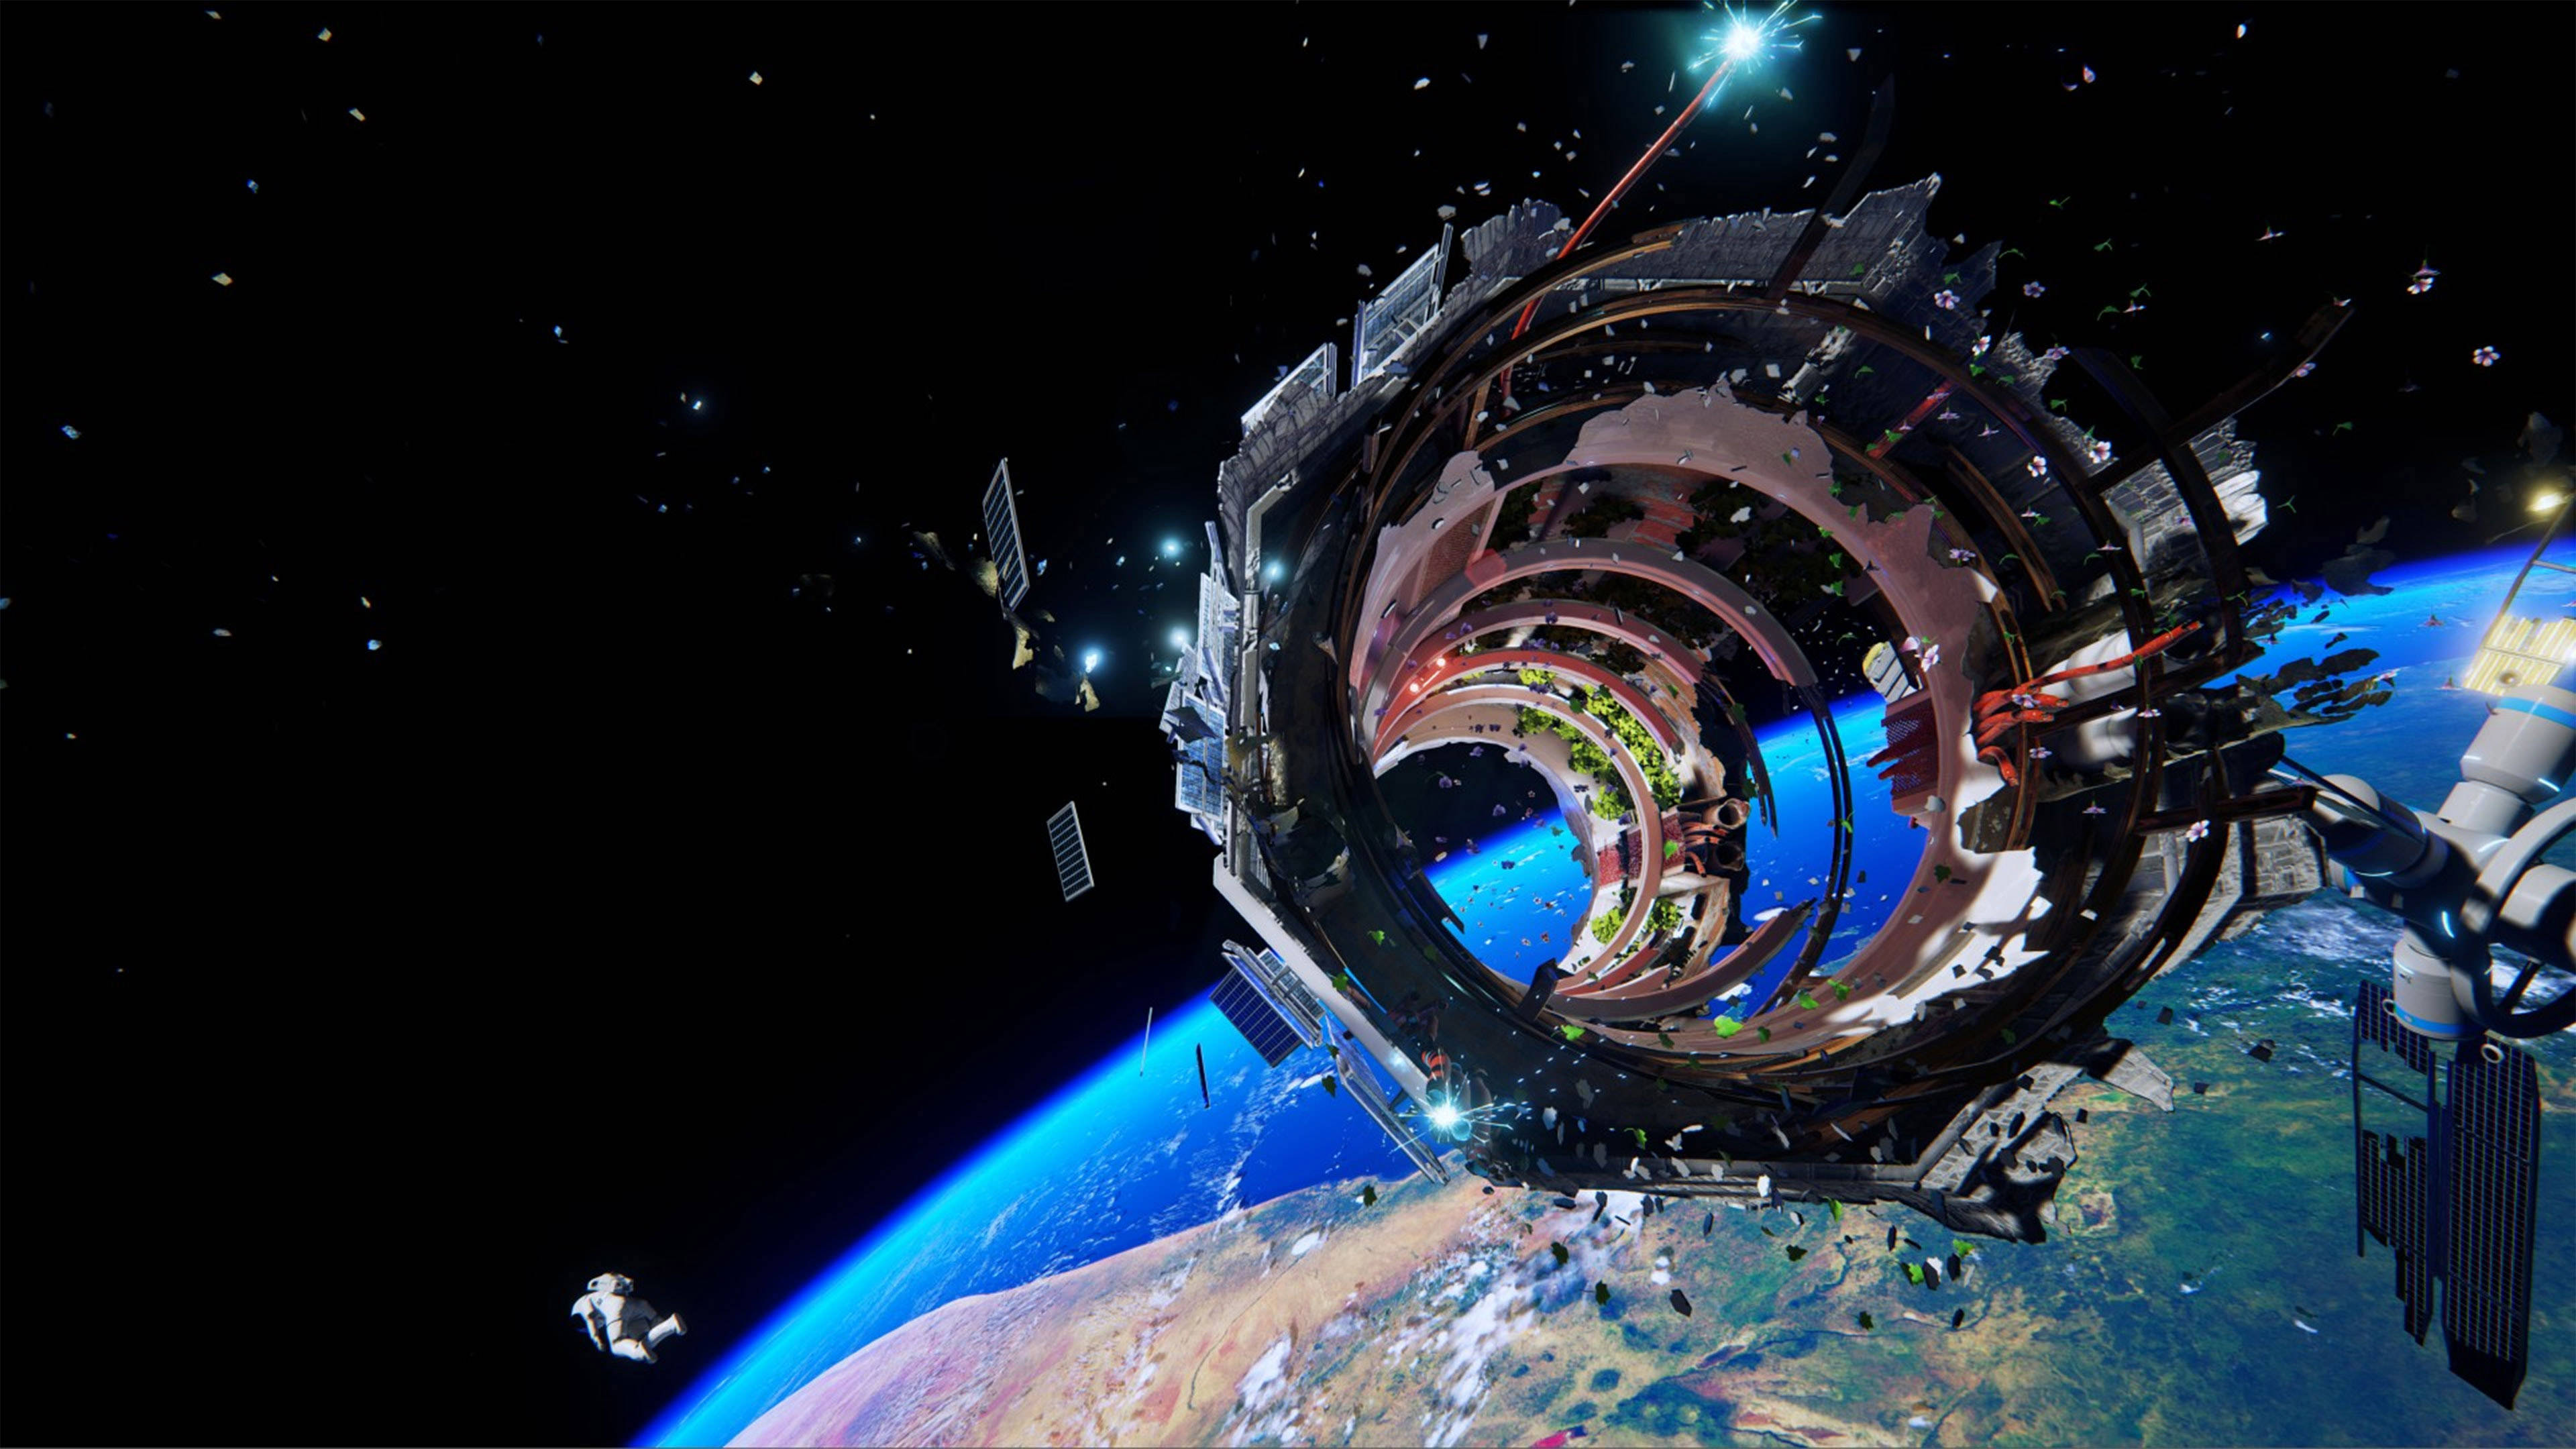 Awesome HD Adr1ft Game Scene Wallpaper